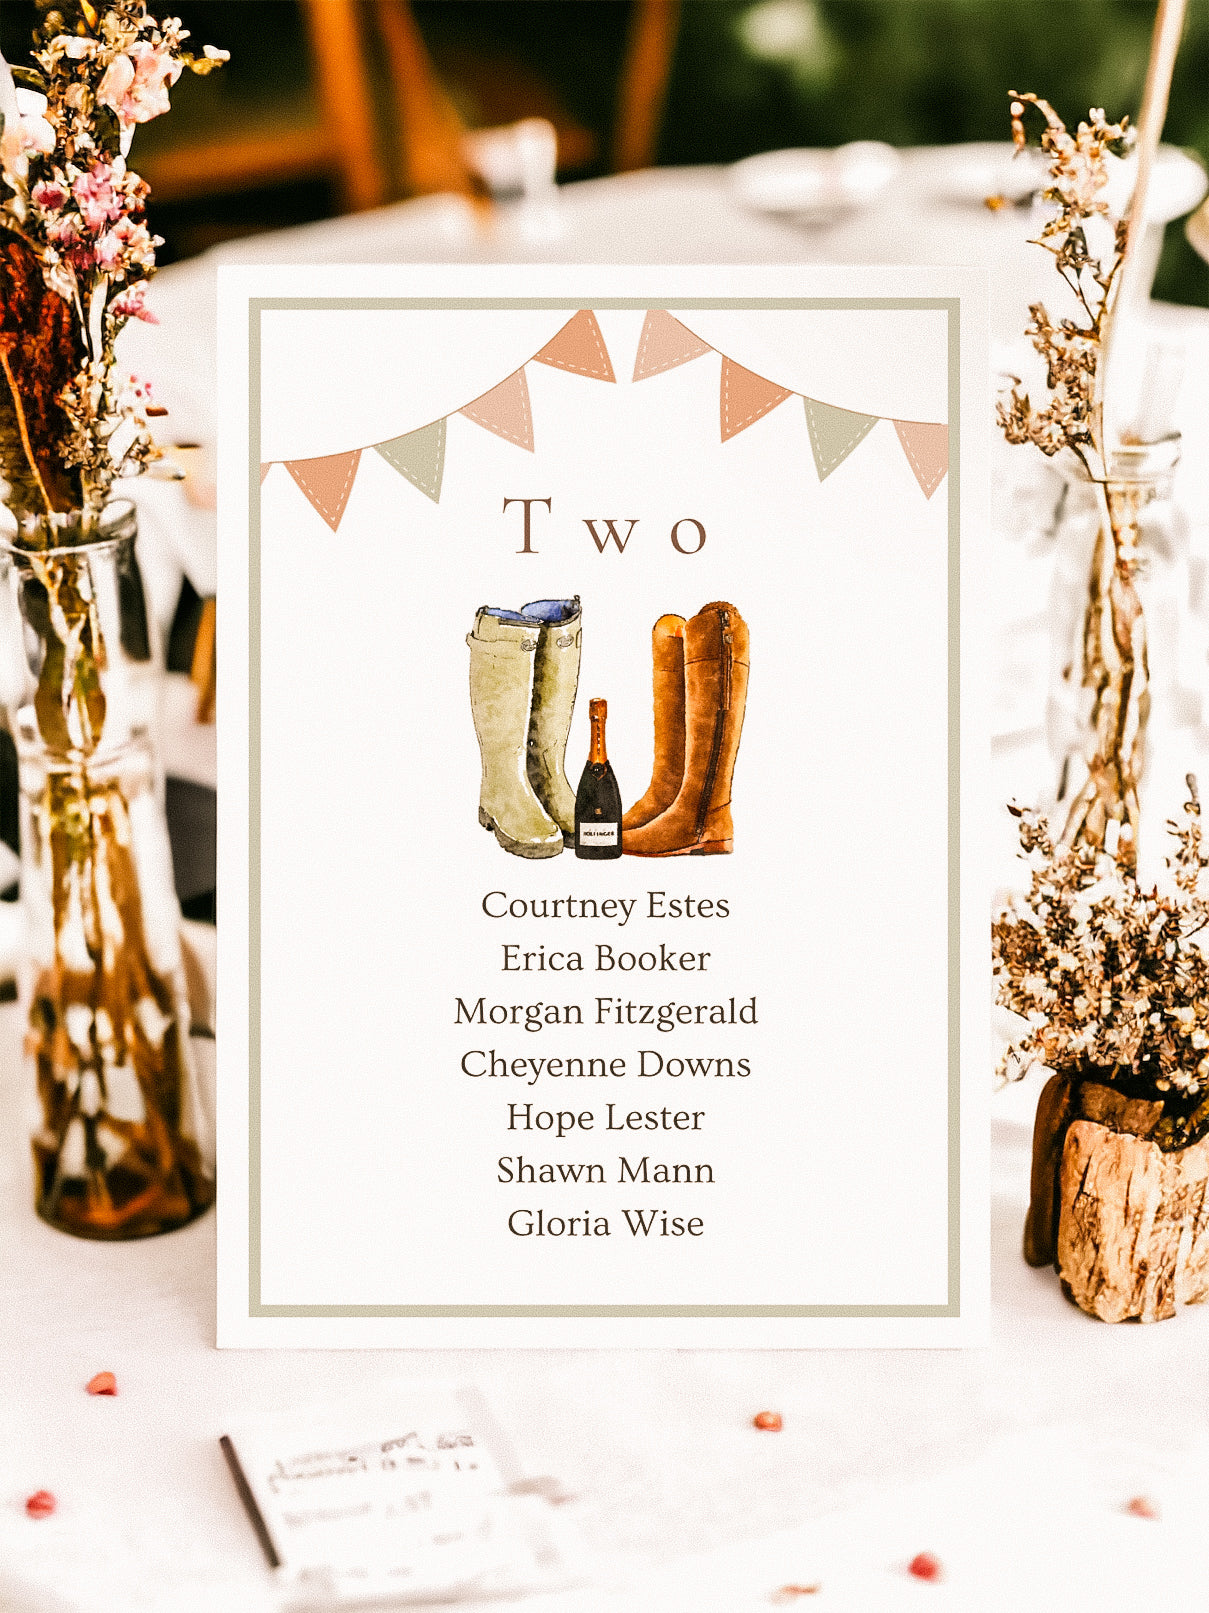 Wellies & Champagne Table Name & Lists